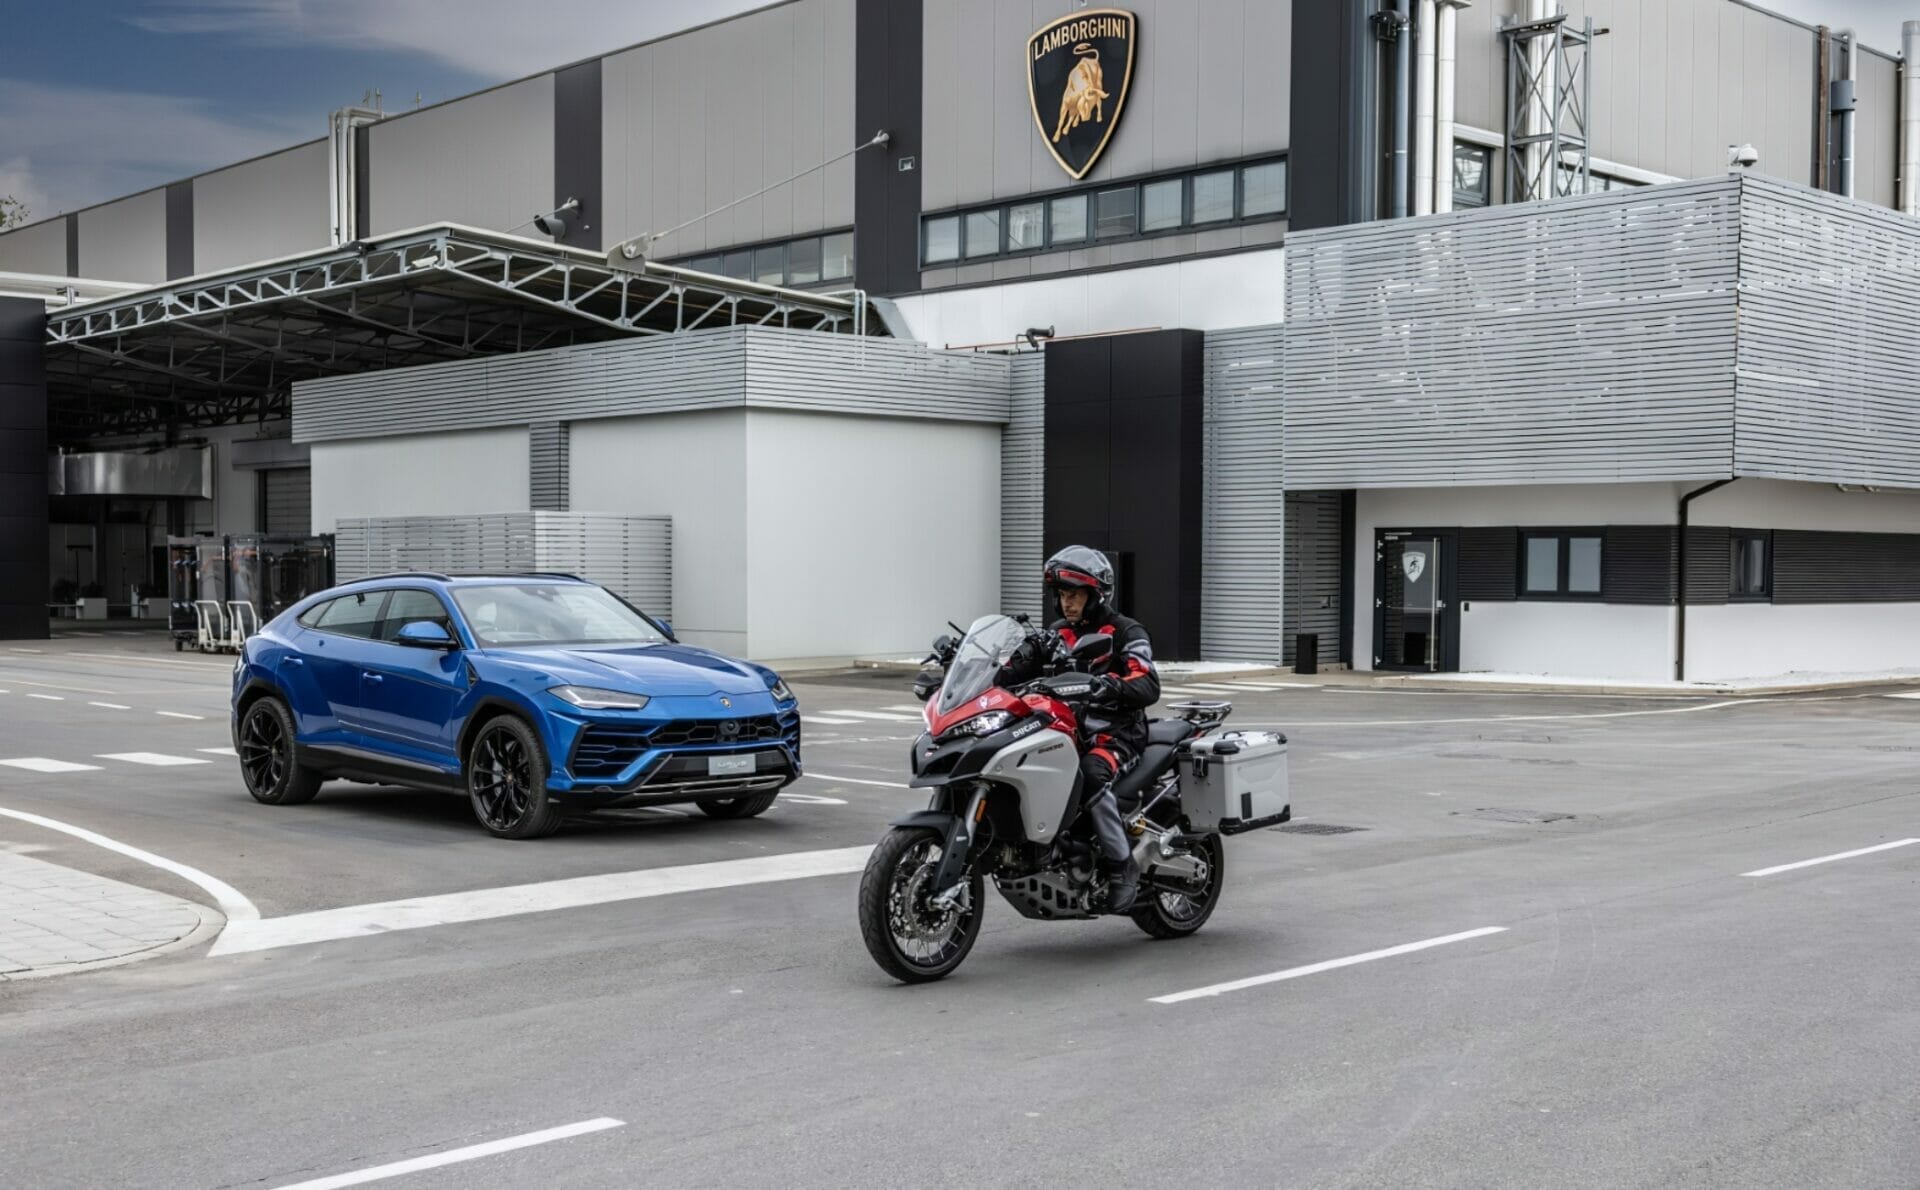 Ducati is committed to improving road safety for motorcycles: Highlights from the Connected Motorcycle Consortium event